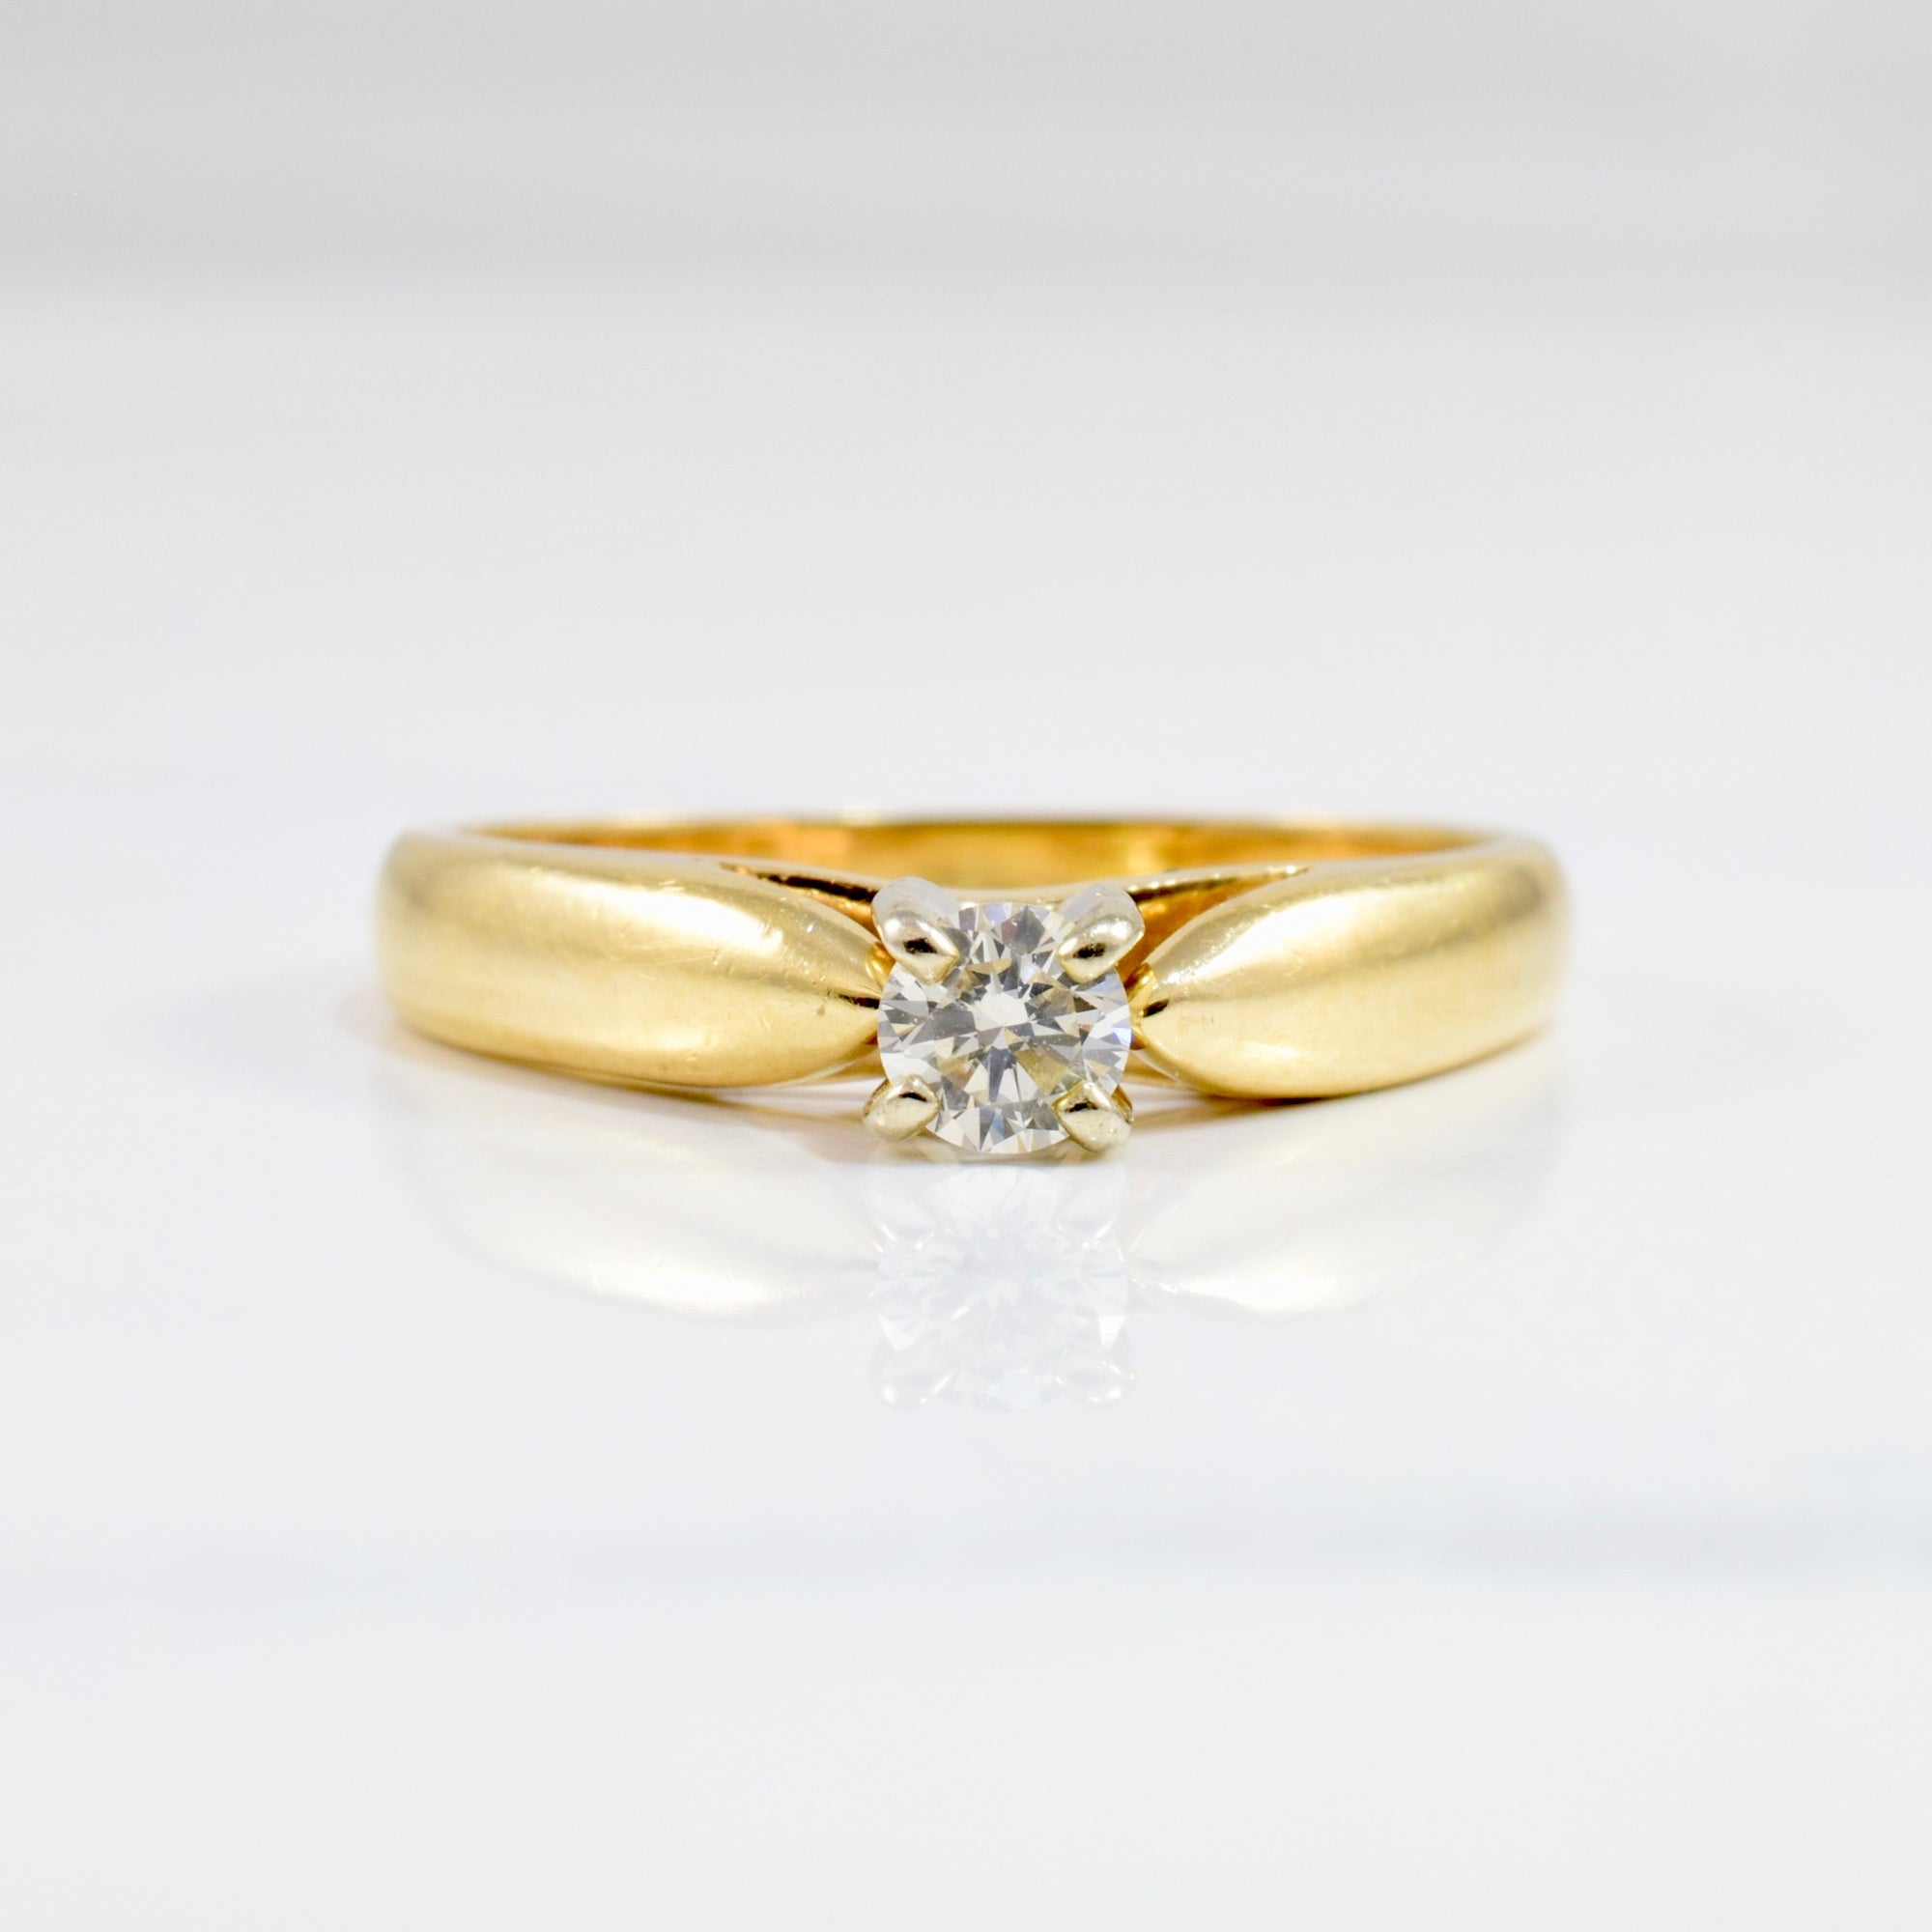 Tapered Cathedral Diamond Engagement Ring | 0.16 ct SZ 6.5 |